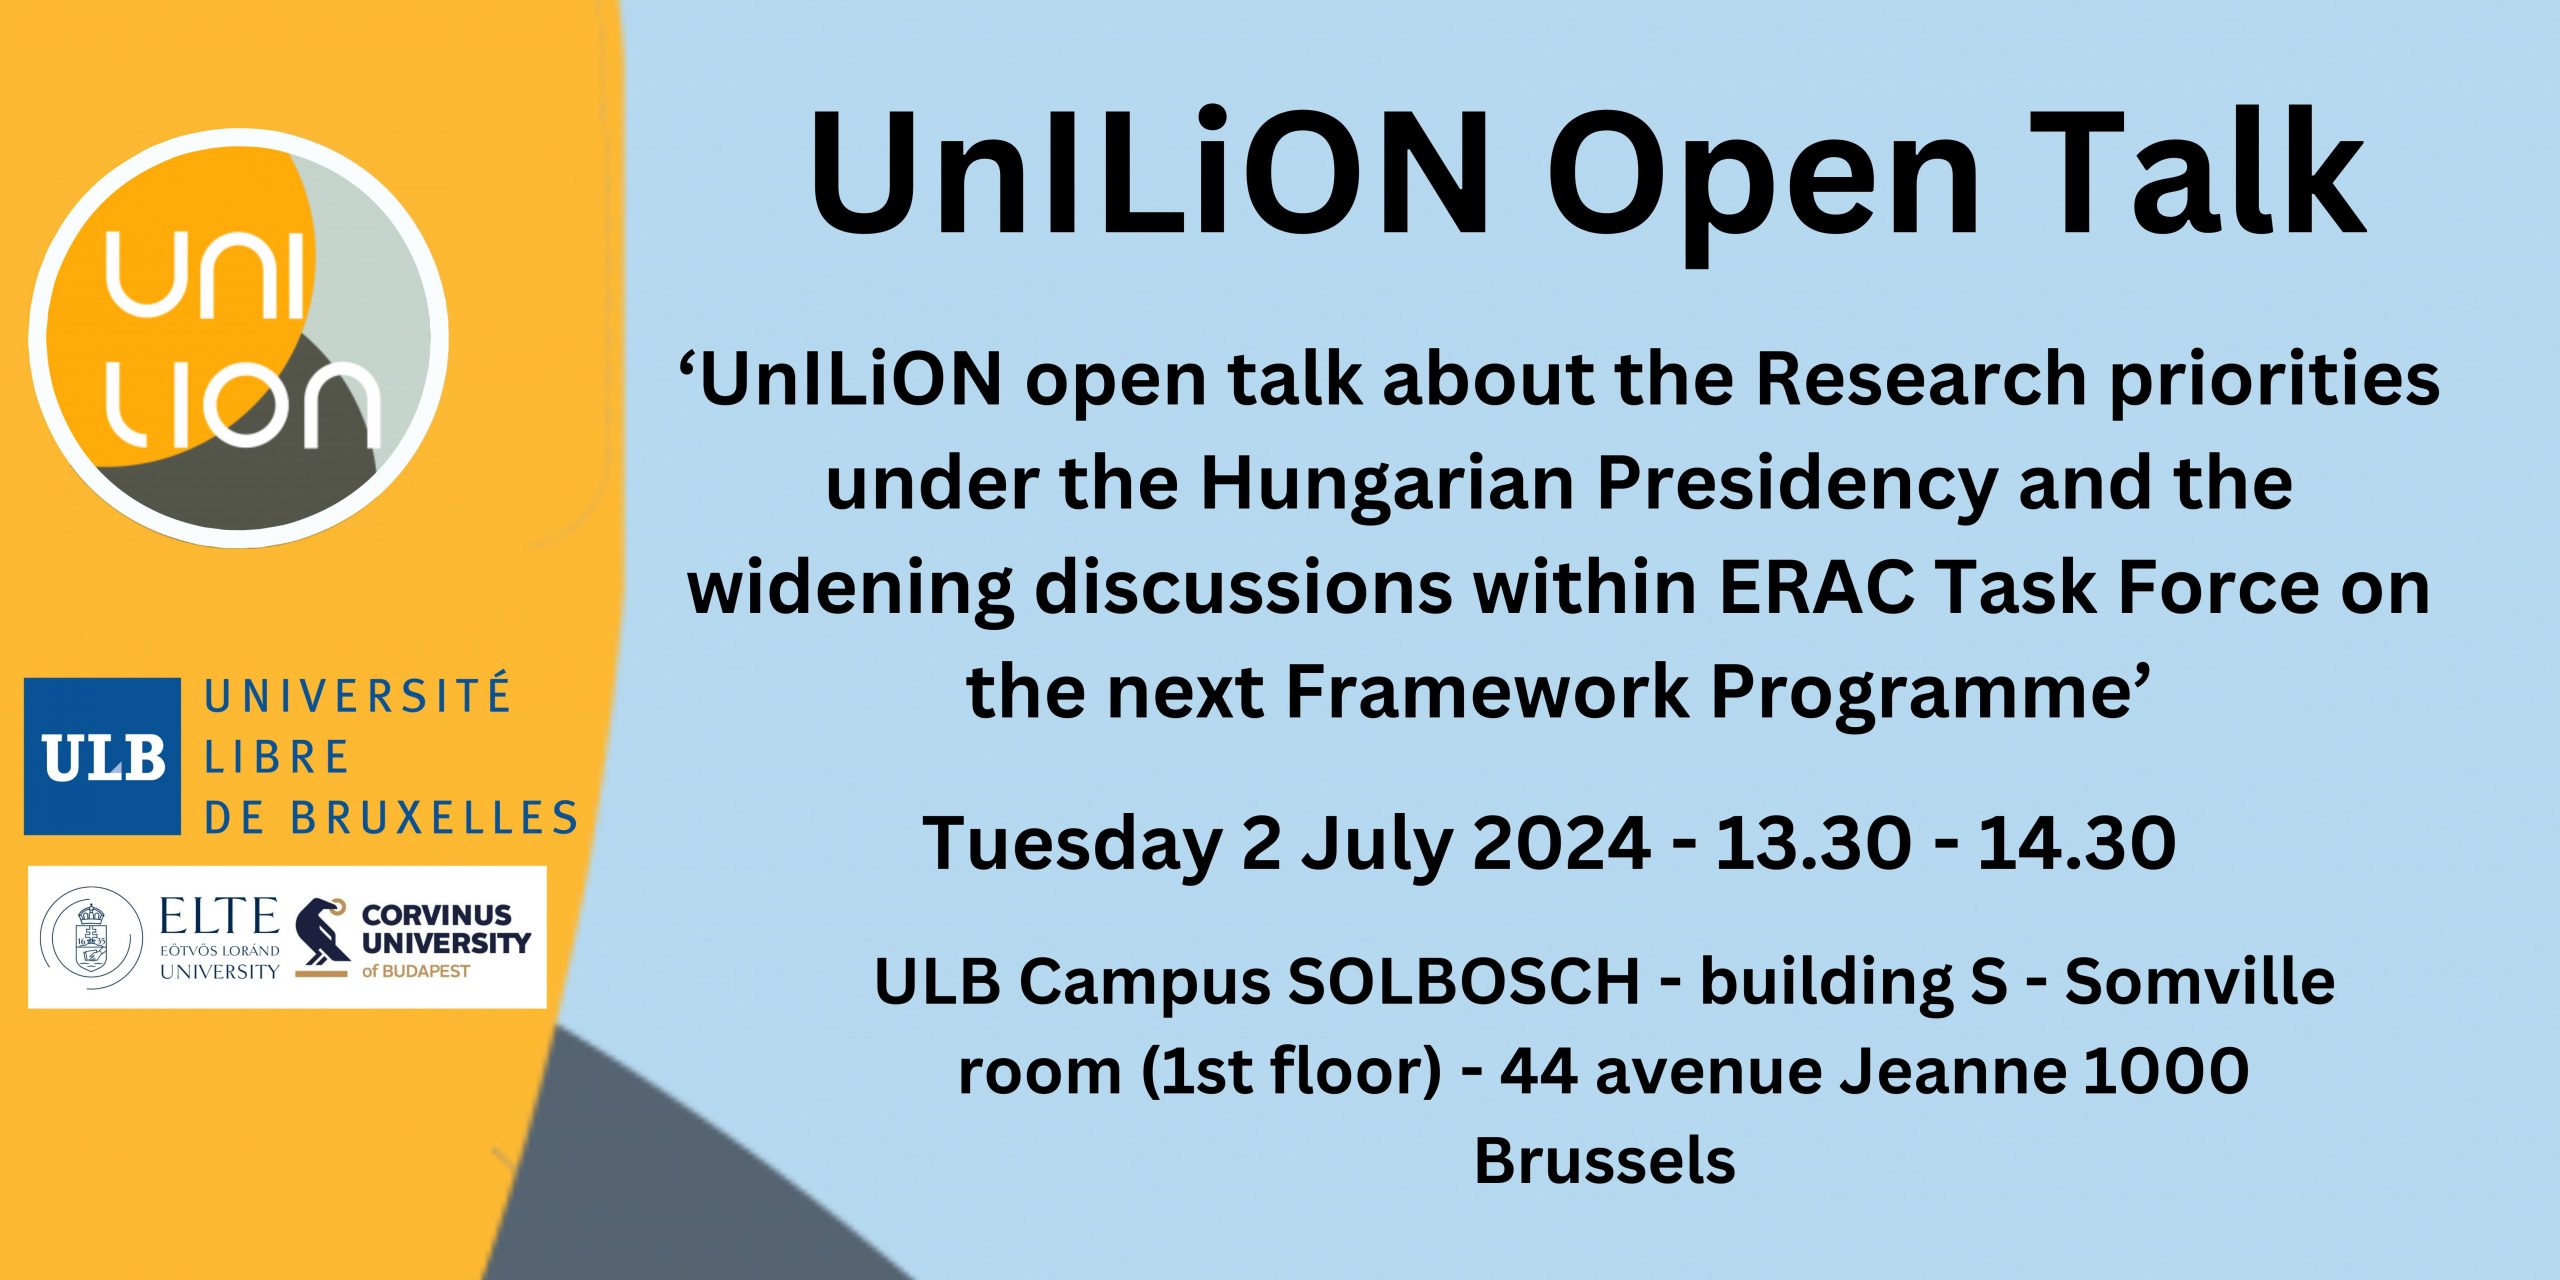 UnILiON Open Talk about the research priorities of the Hungarian Presidency and the widening discussions within ERAC Task Force